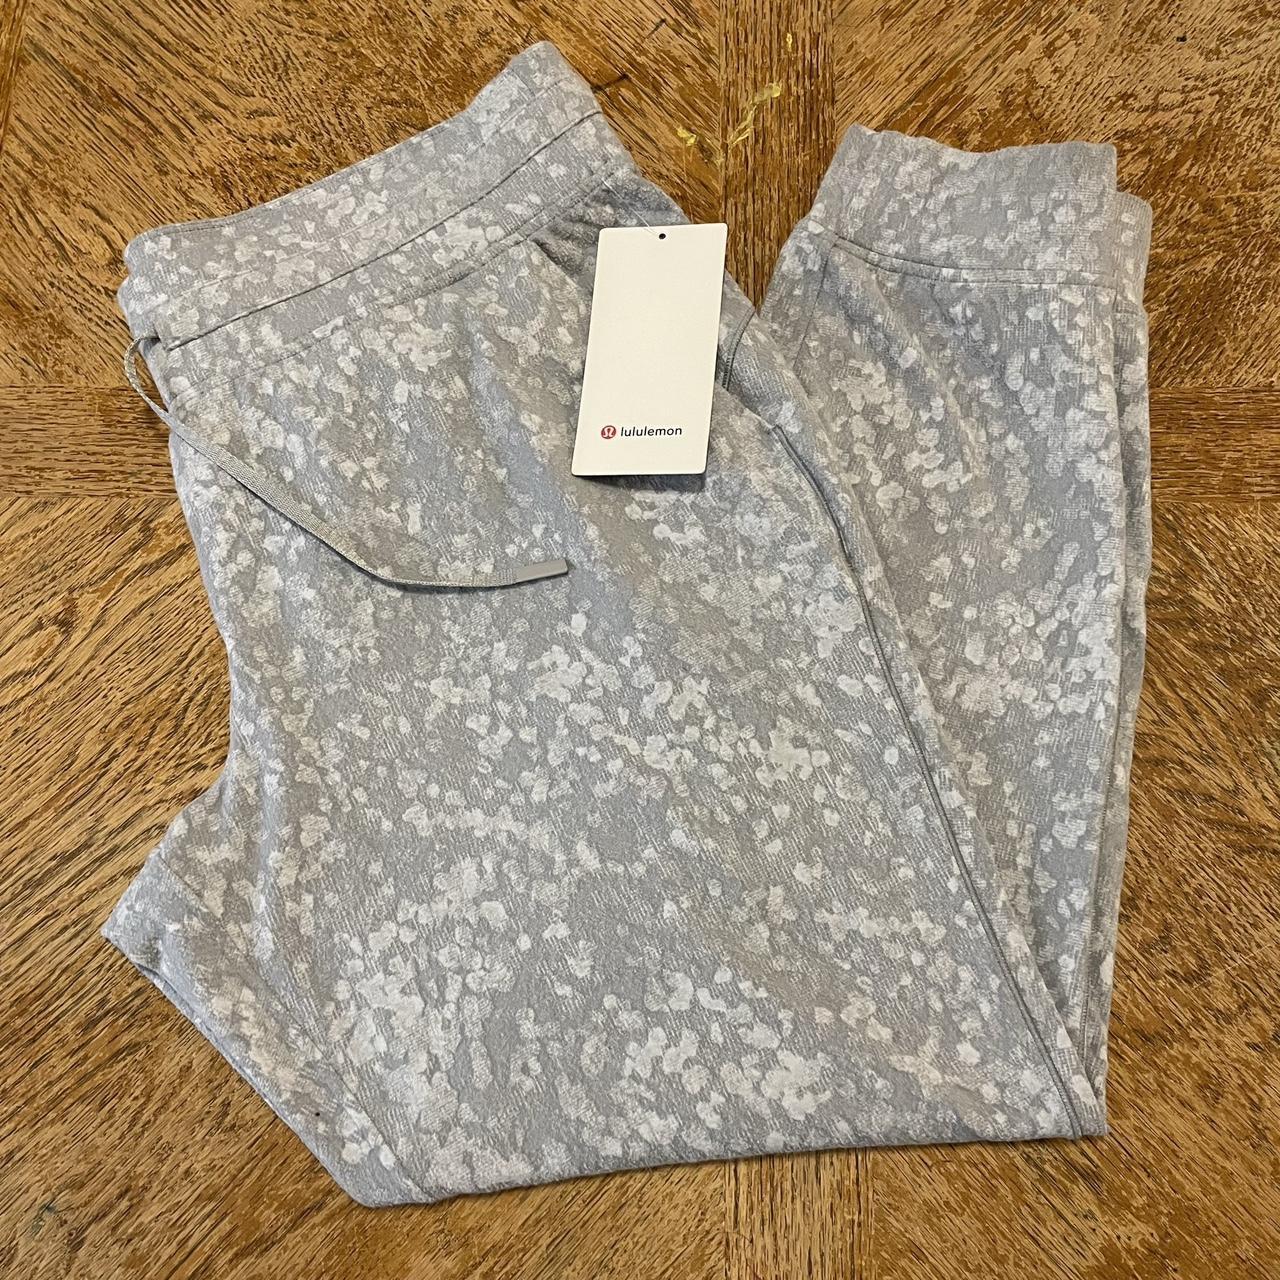 Lululemon Ready To Rulu Jogger Crop In White